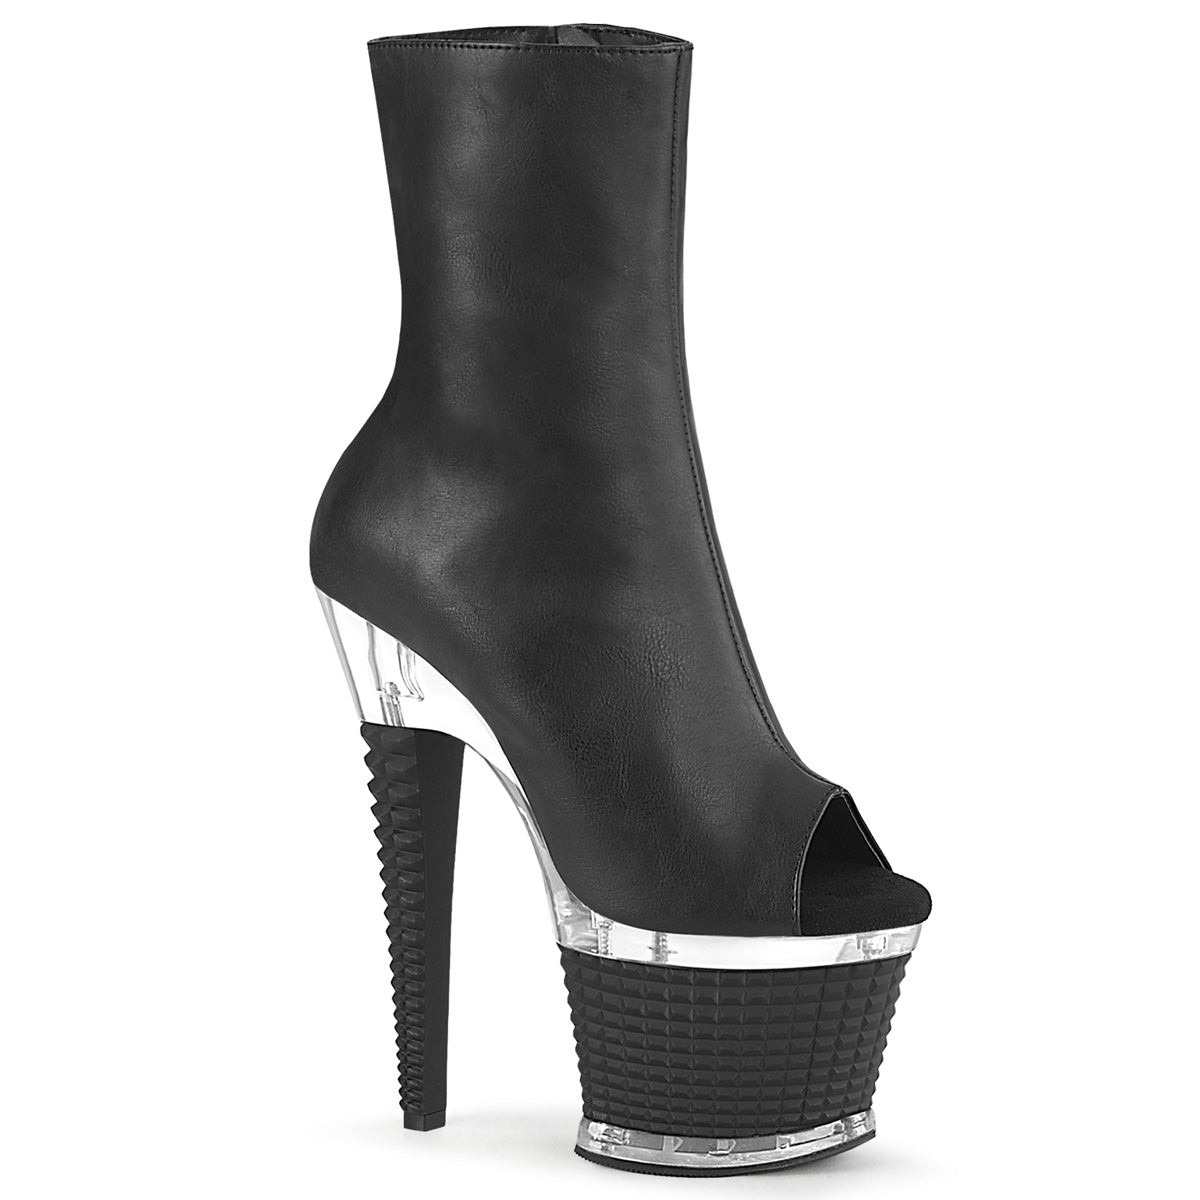 SPECTATOR-1012 Black Faux Leather/Clear Ankle Boot Pleaser